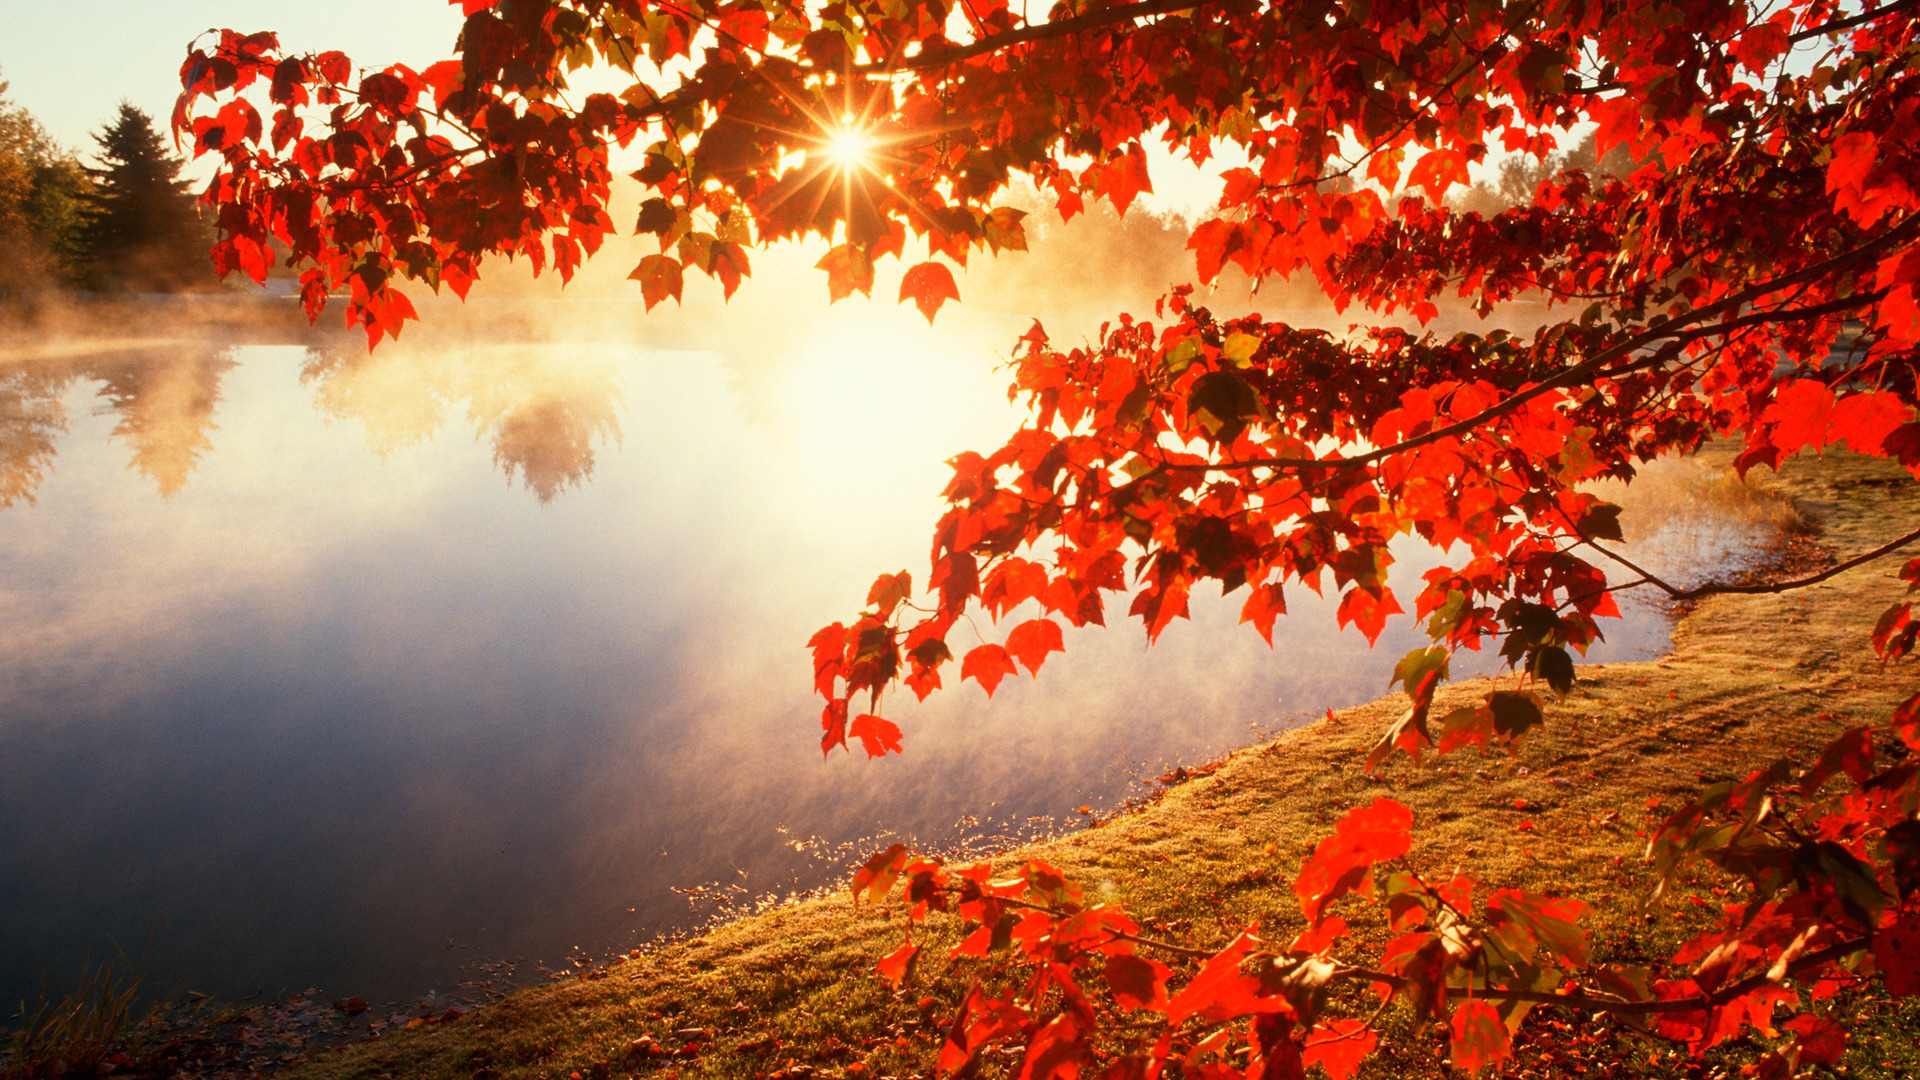 Collection of Autumn Wallpapers on HDWallpapers